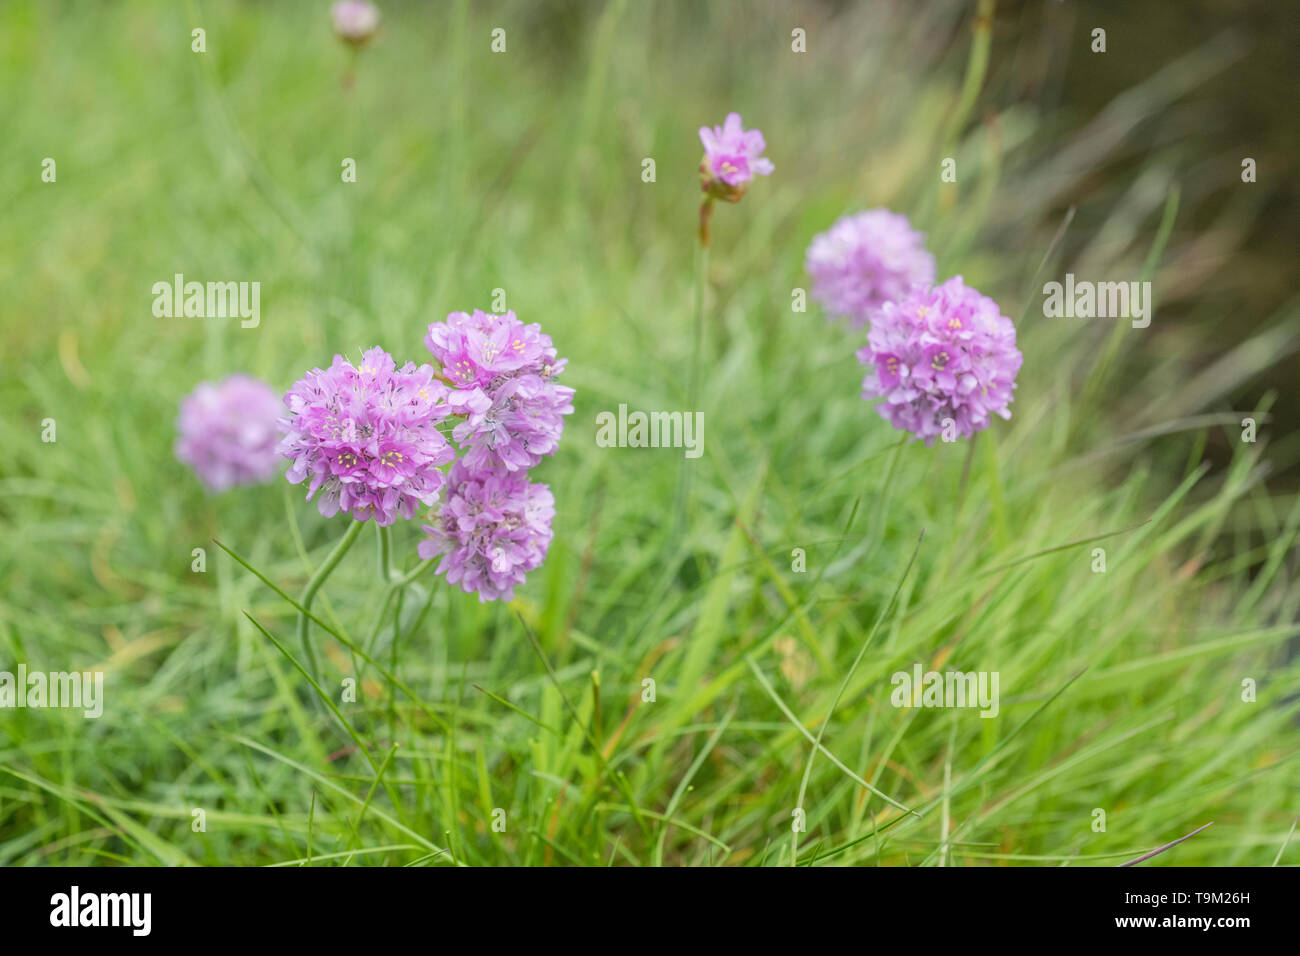 Macro close-up of pink flowers of Thrift / Sea Pink - Armeria maritima - a common seashore and coastal plant in the UK. Stock Photo